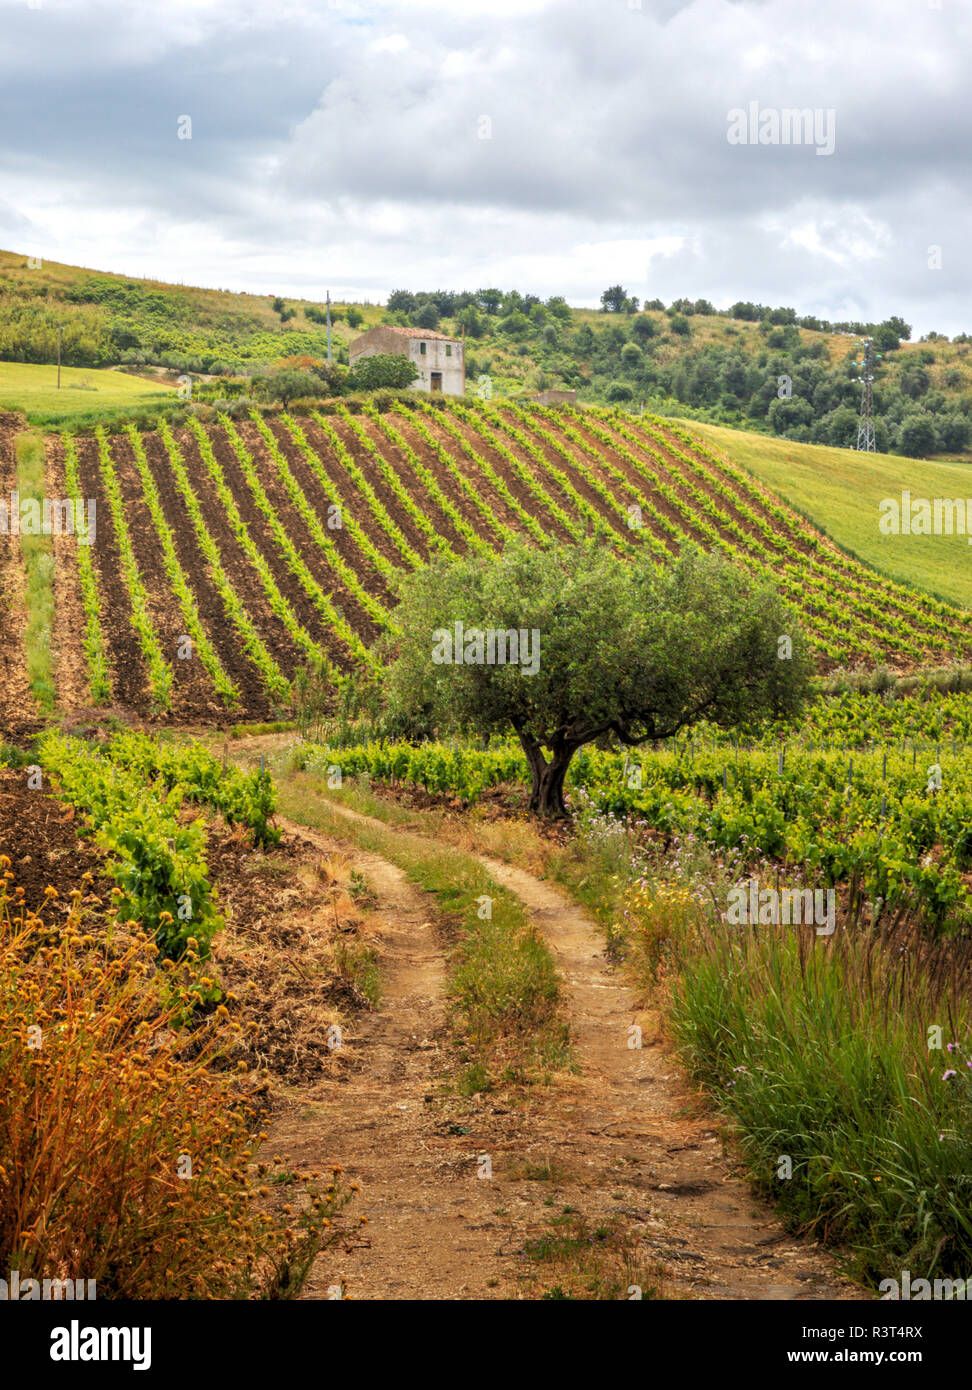 Overview of vineyards with mountain range and lone tree Stock Photo